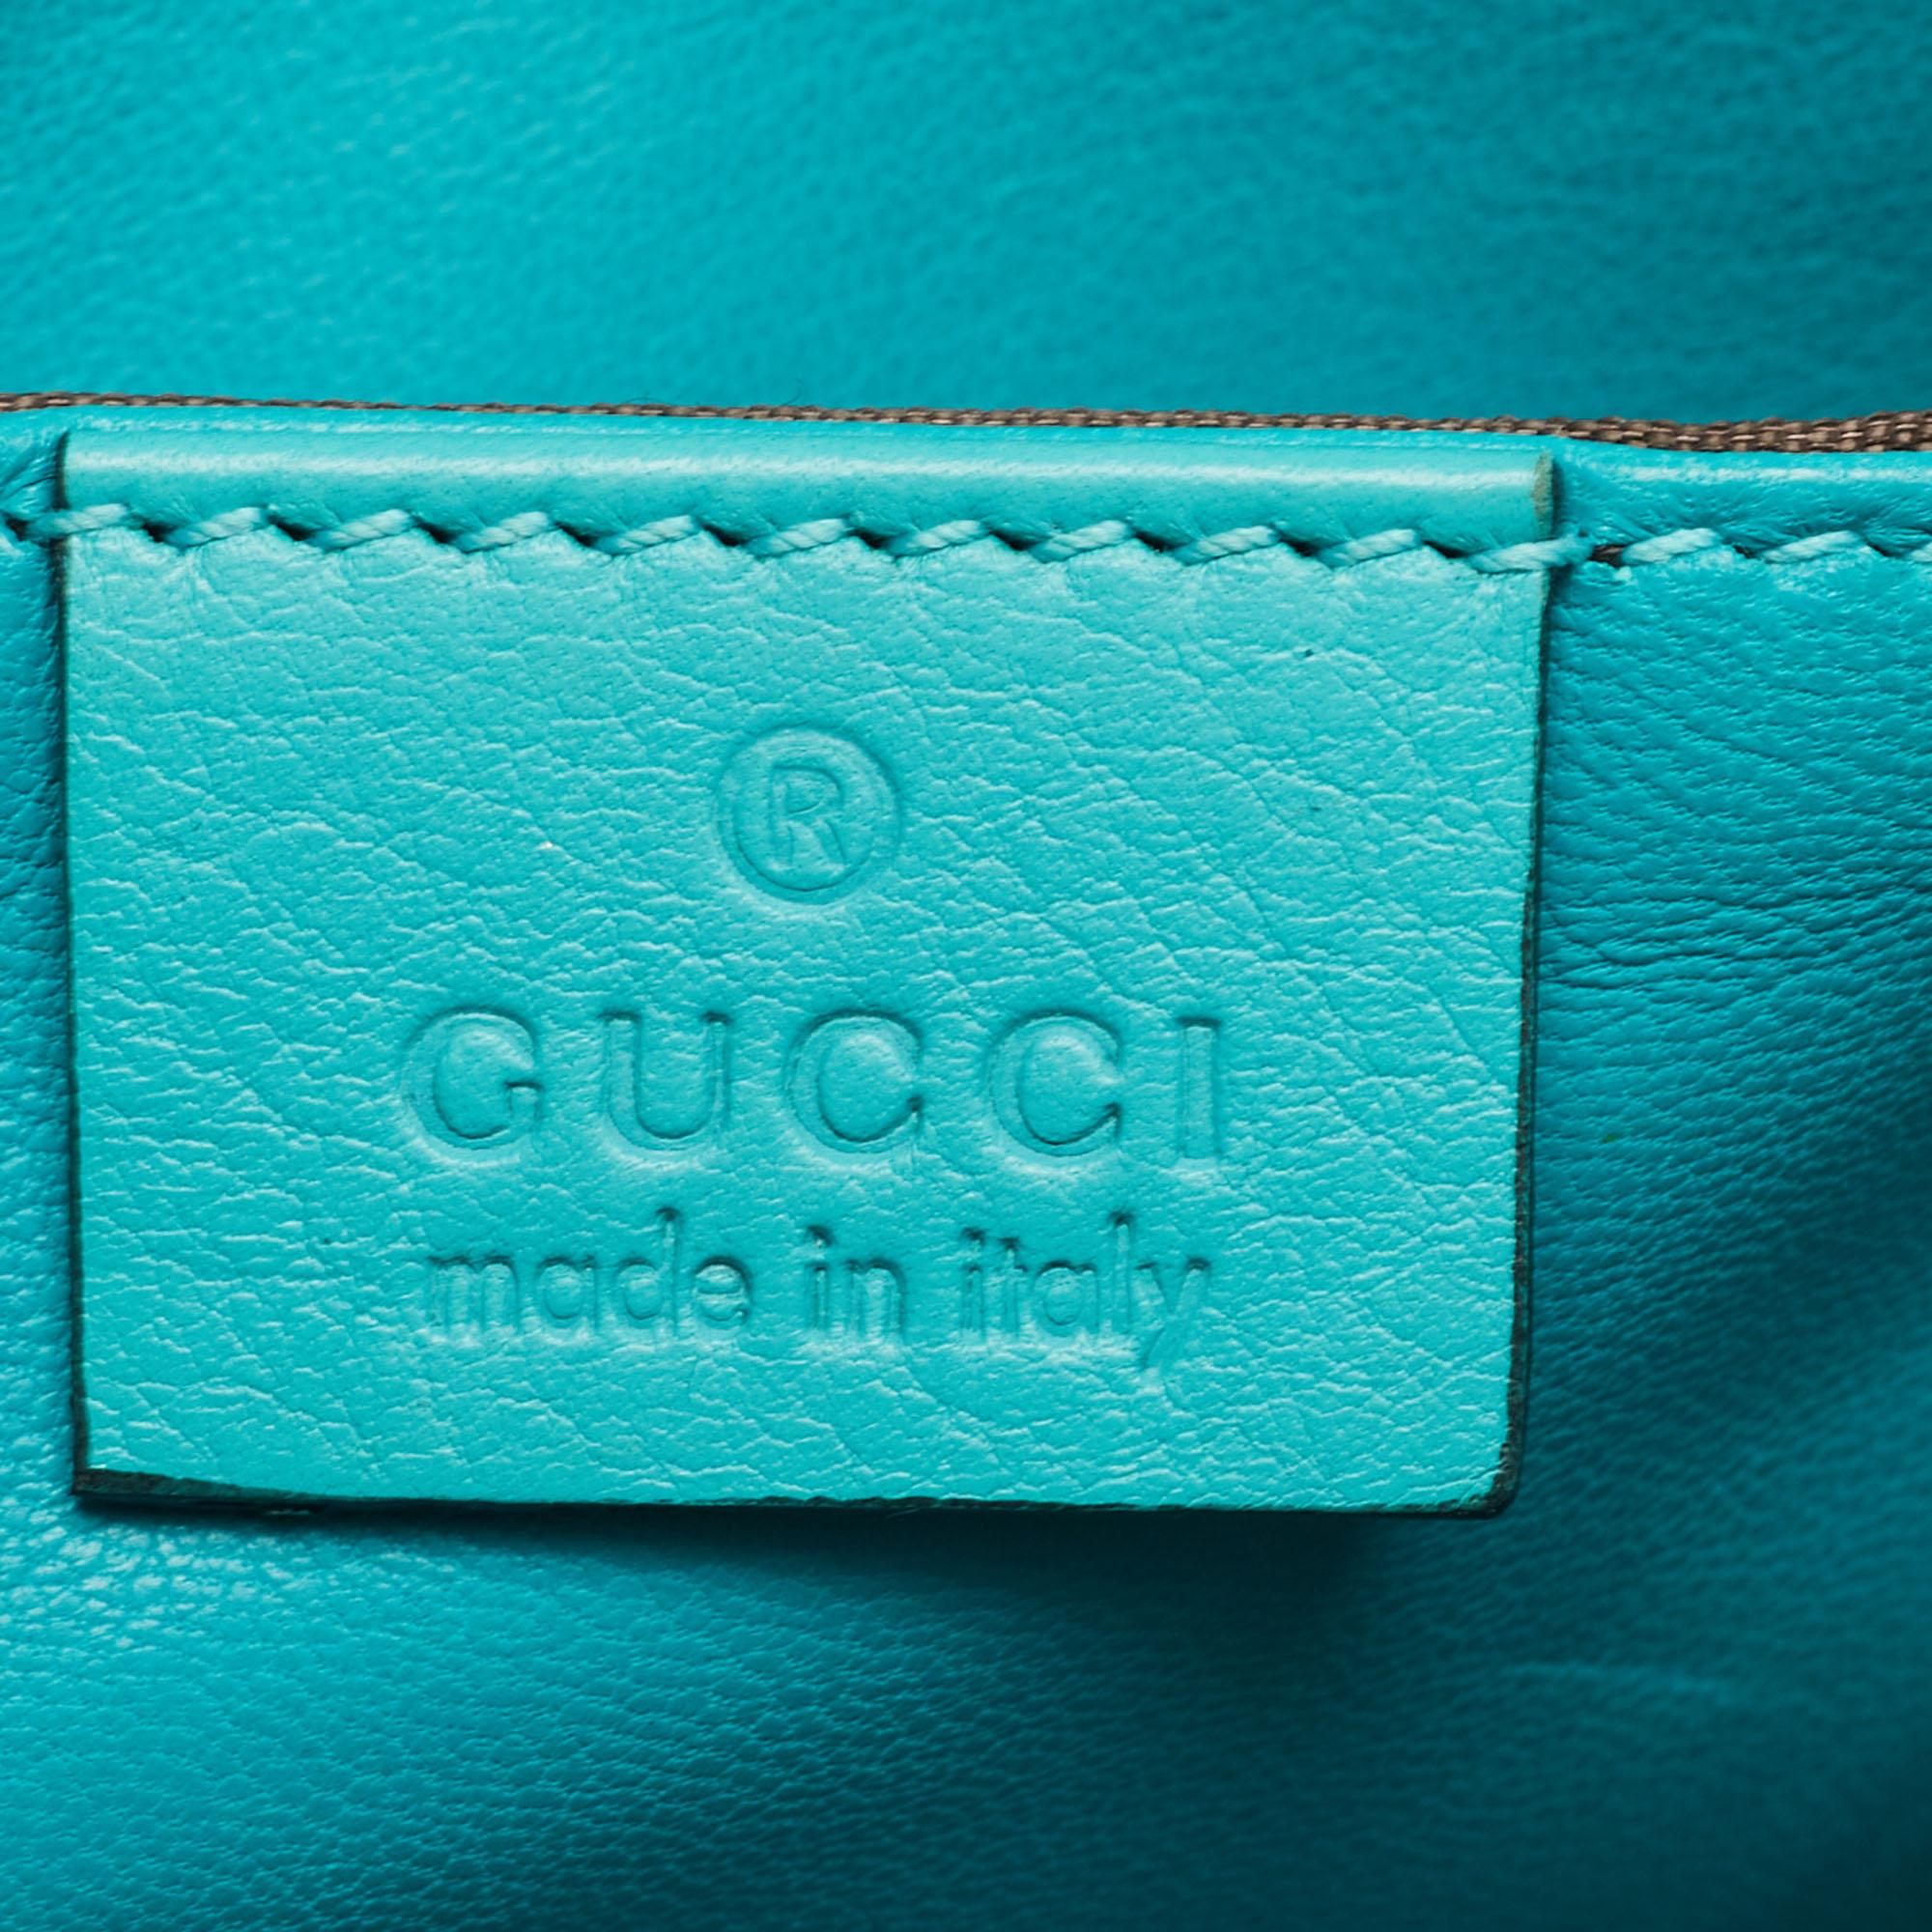 Gucci Turquoise Leather Small Emily Shoulder Bag 8